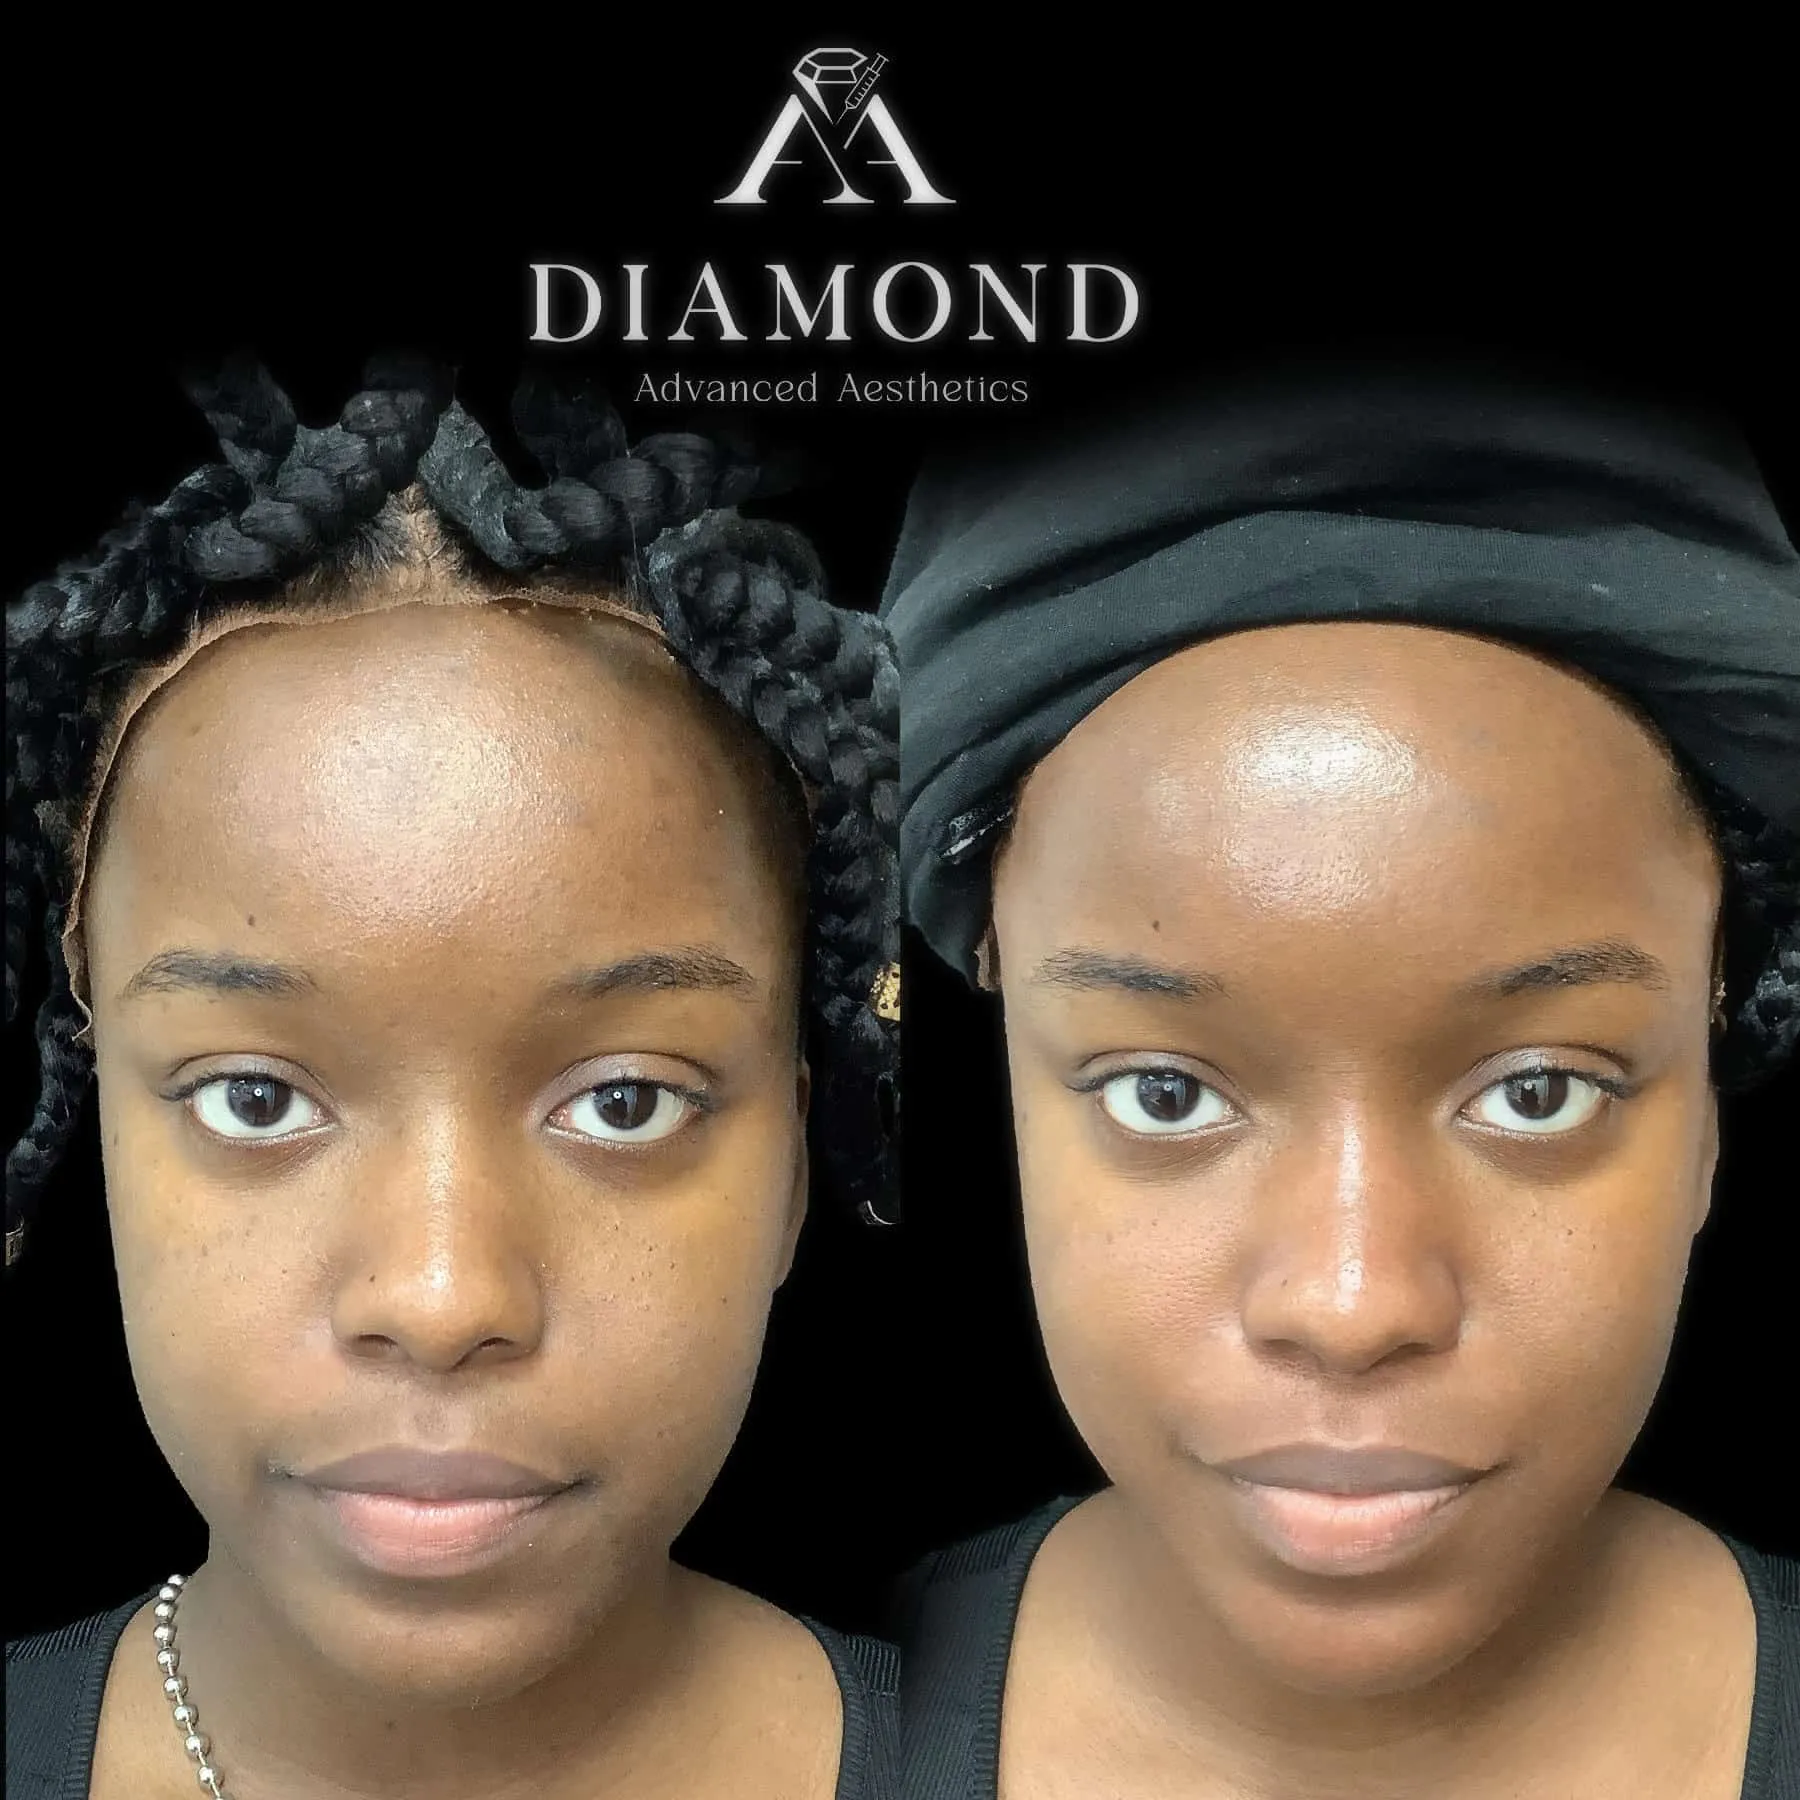 Hydrafacial Before-and-After |diamond advanced aesthetics | New york